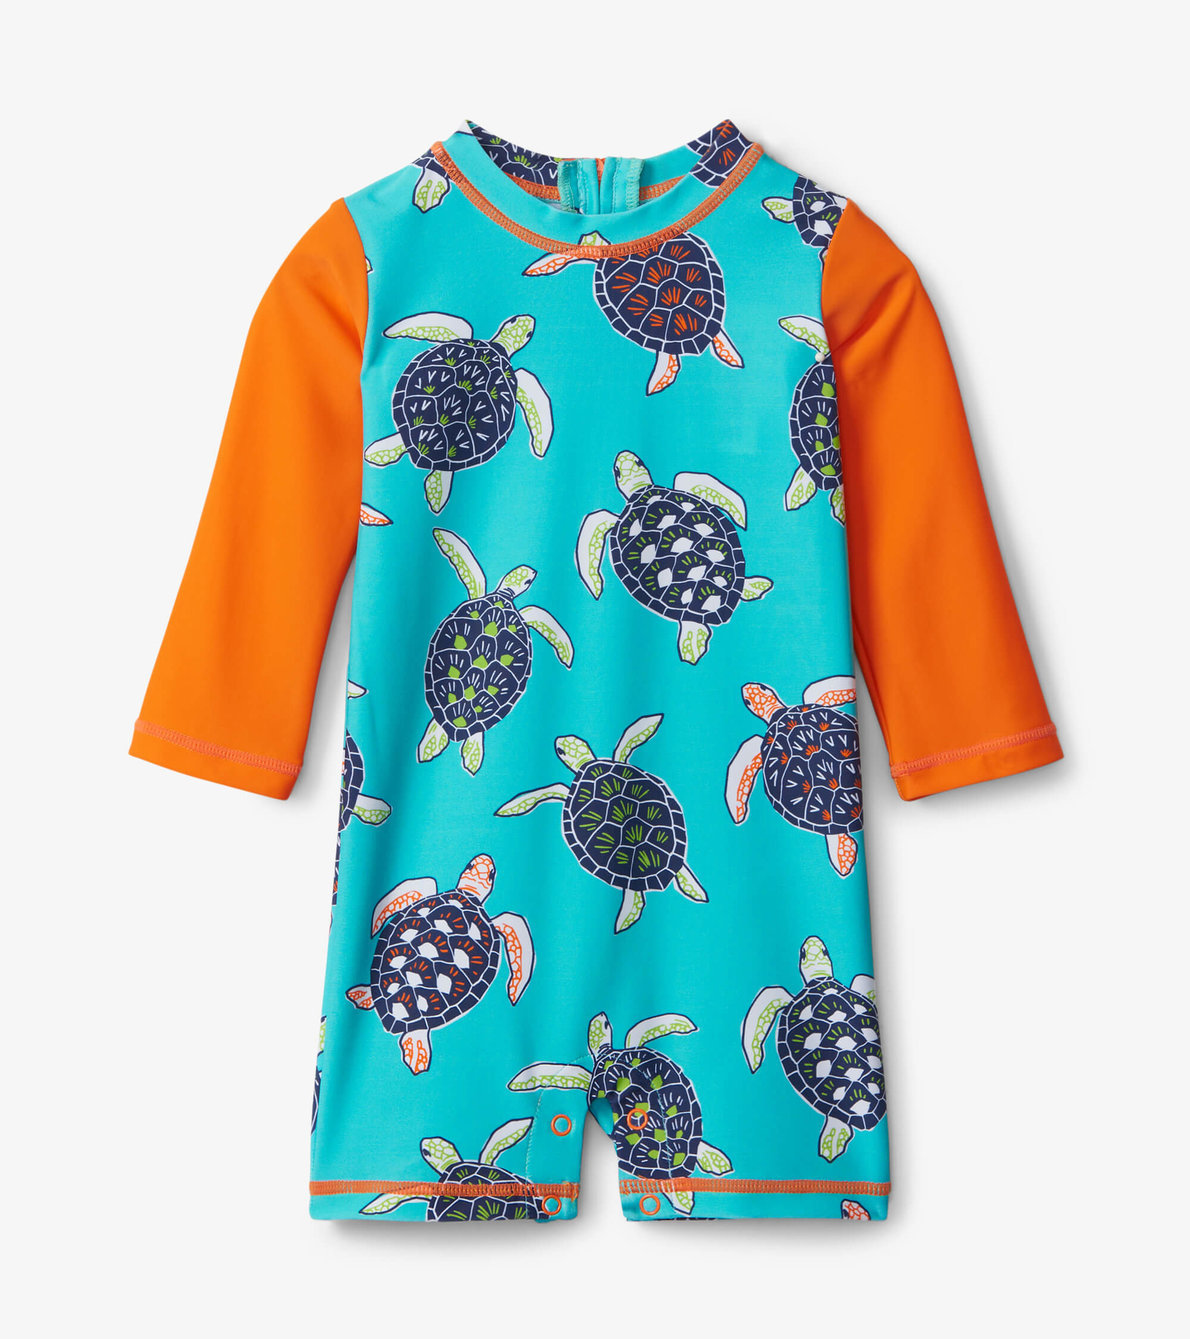 View larger image of Tropical Turtles Baby One-Piece Rashguard